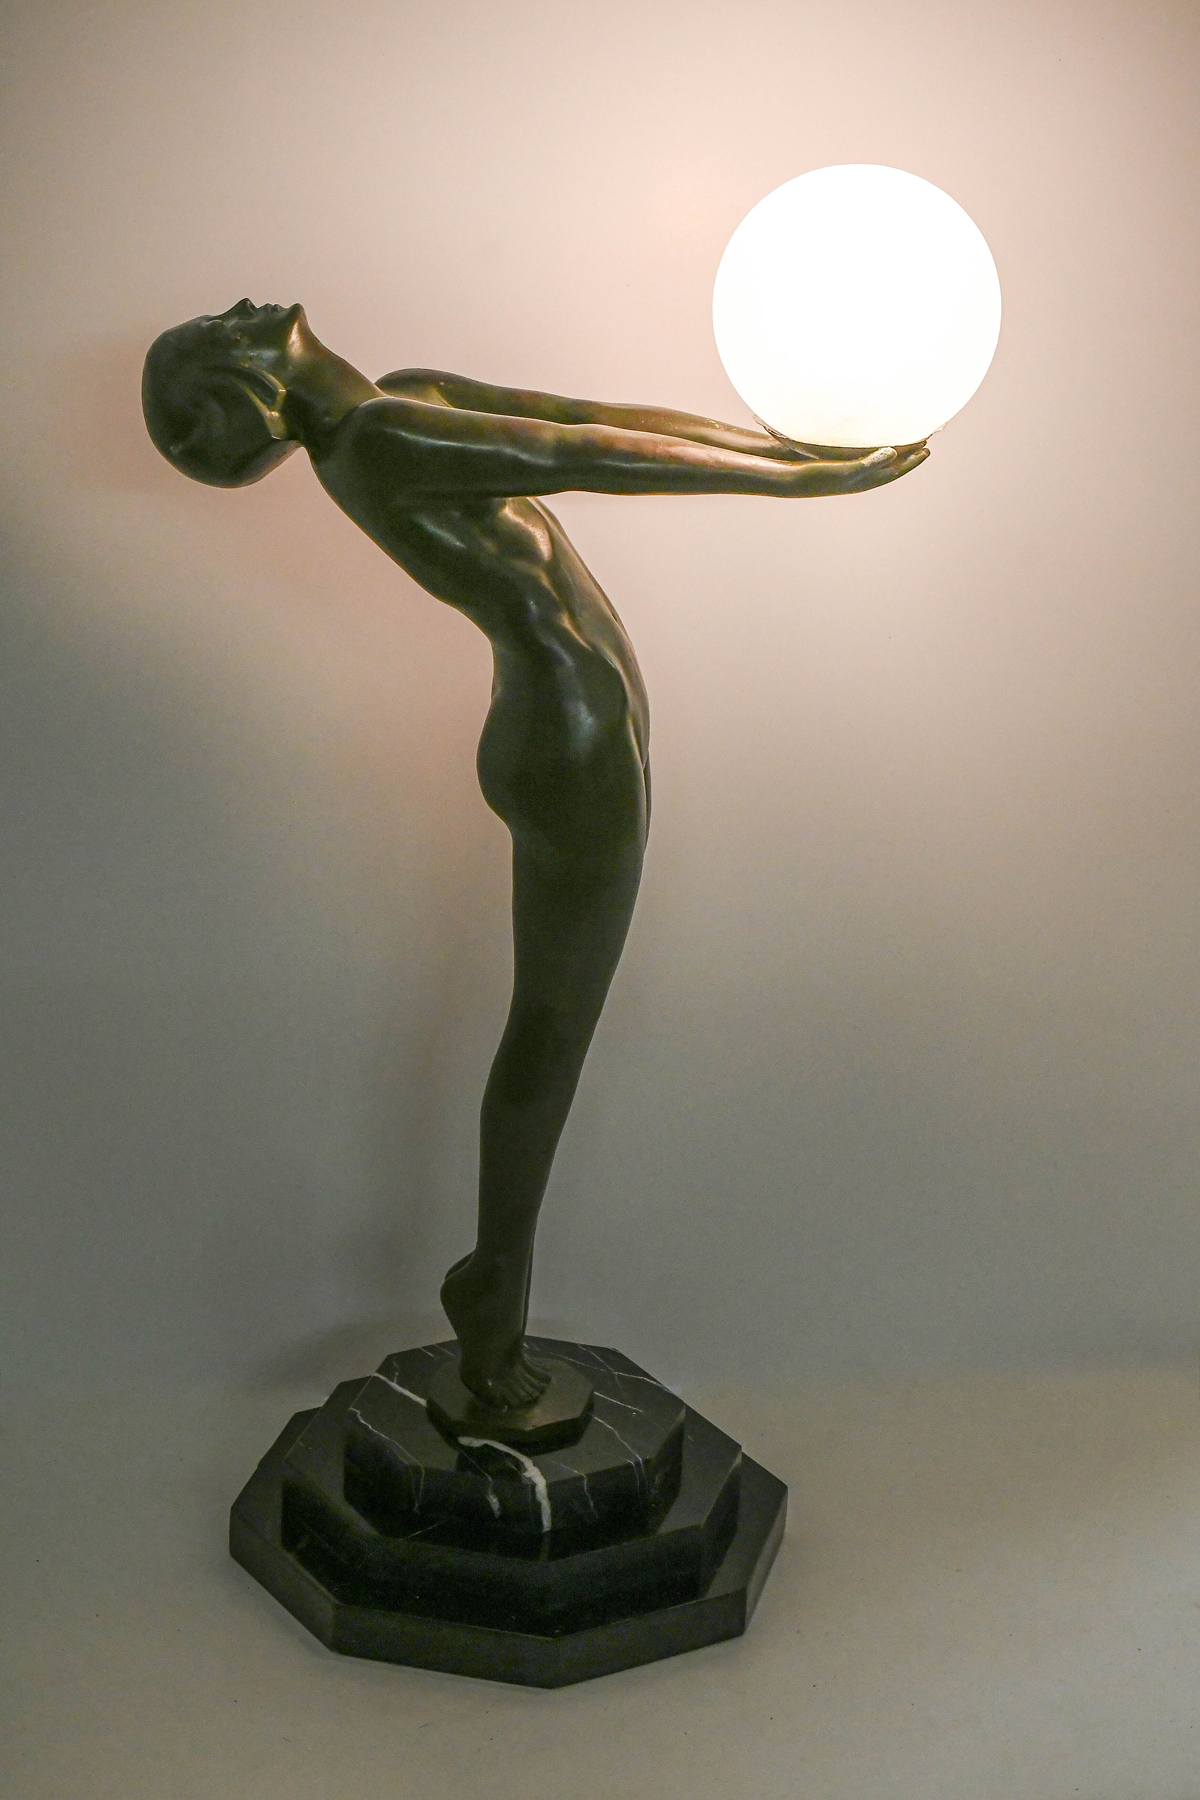 ART DECO STYLE NUDE LAMP WITH BALL